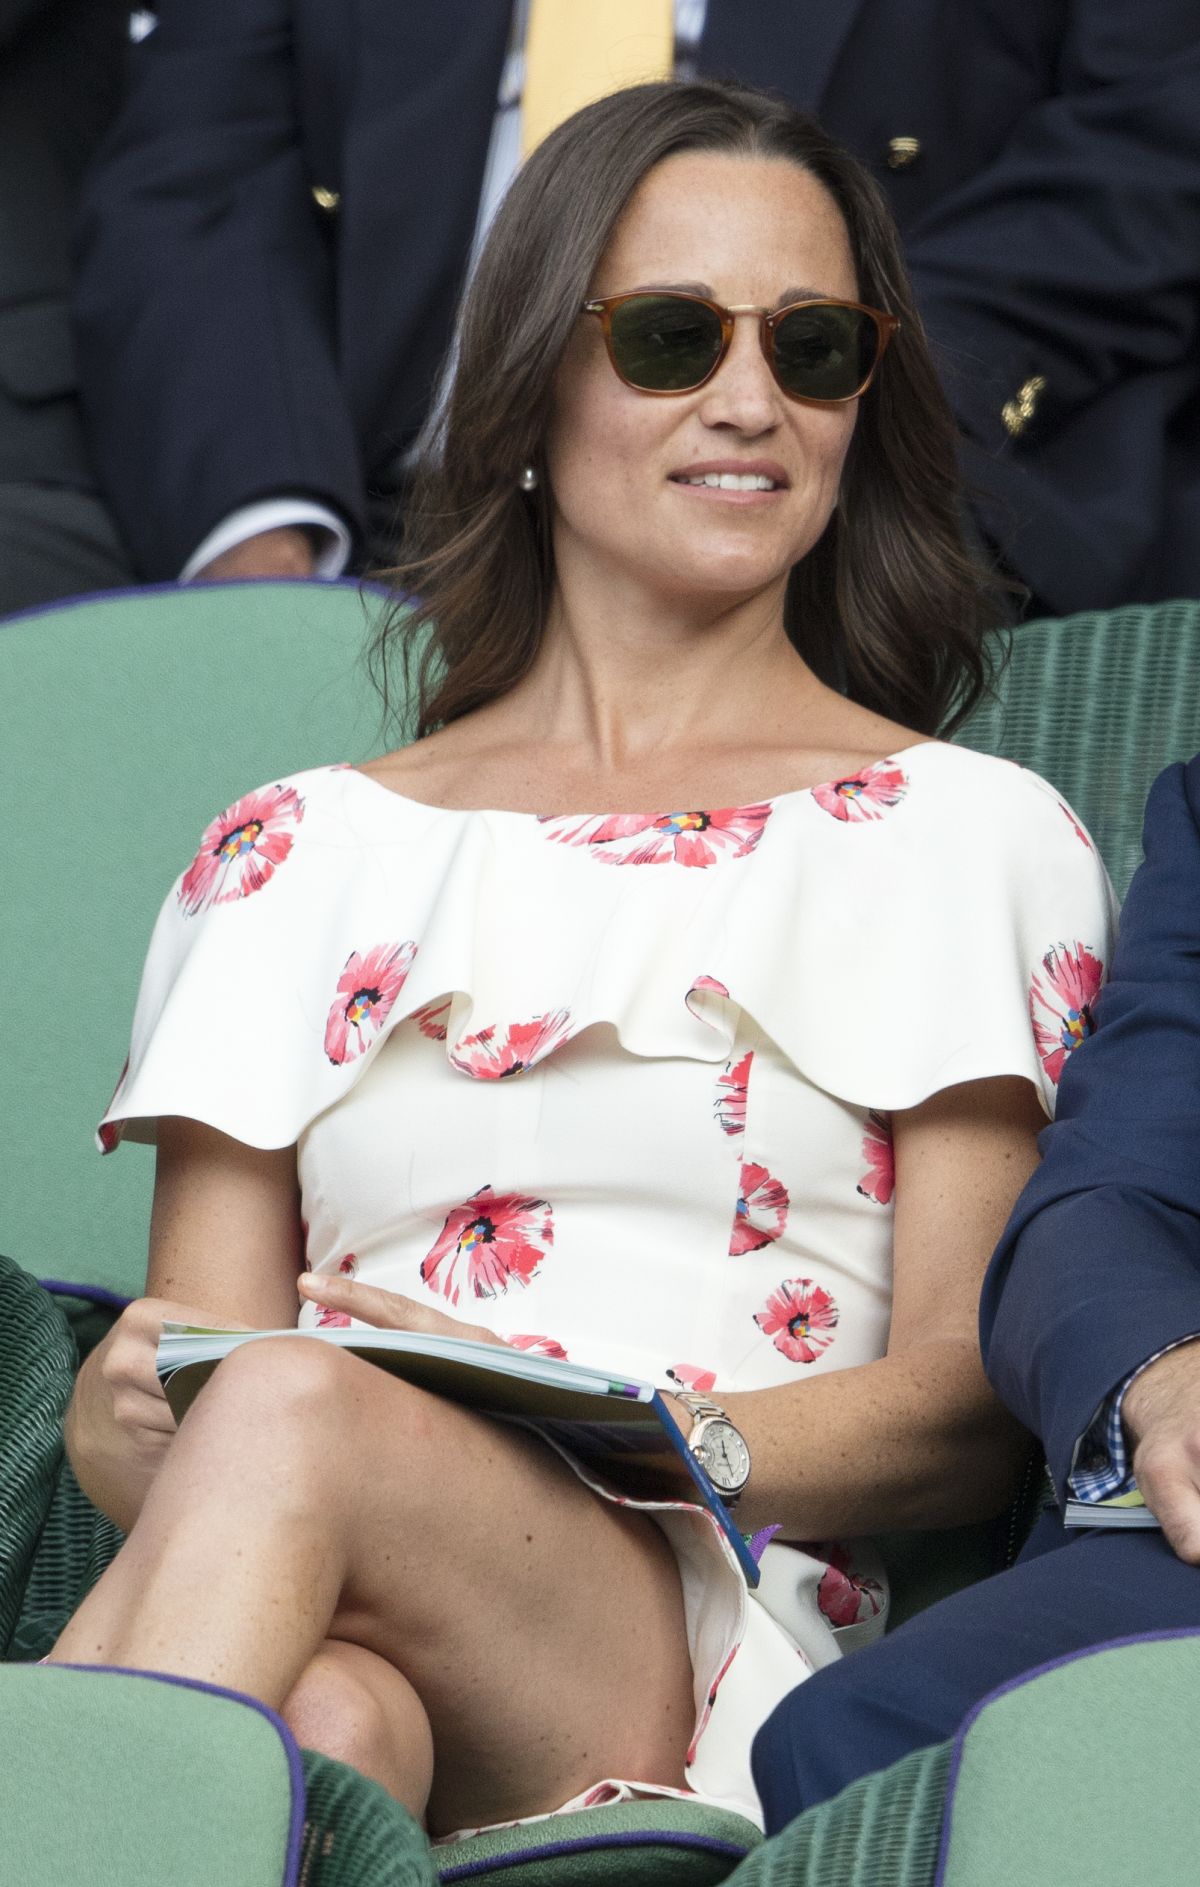 PIPPA MIDDLETON at Day One of Championships in Wimbledon 06/27/2016.